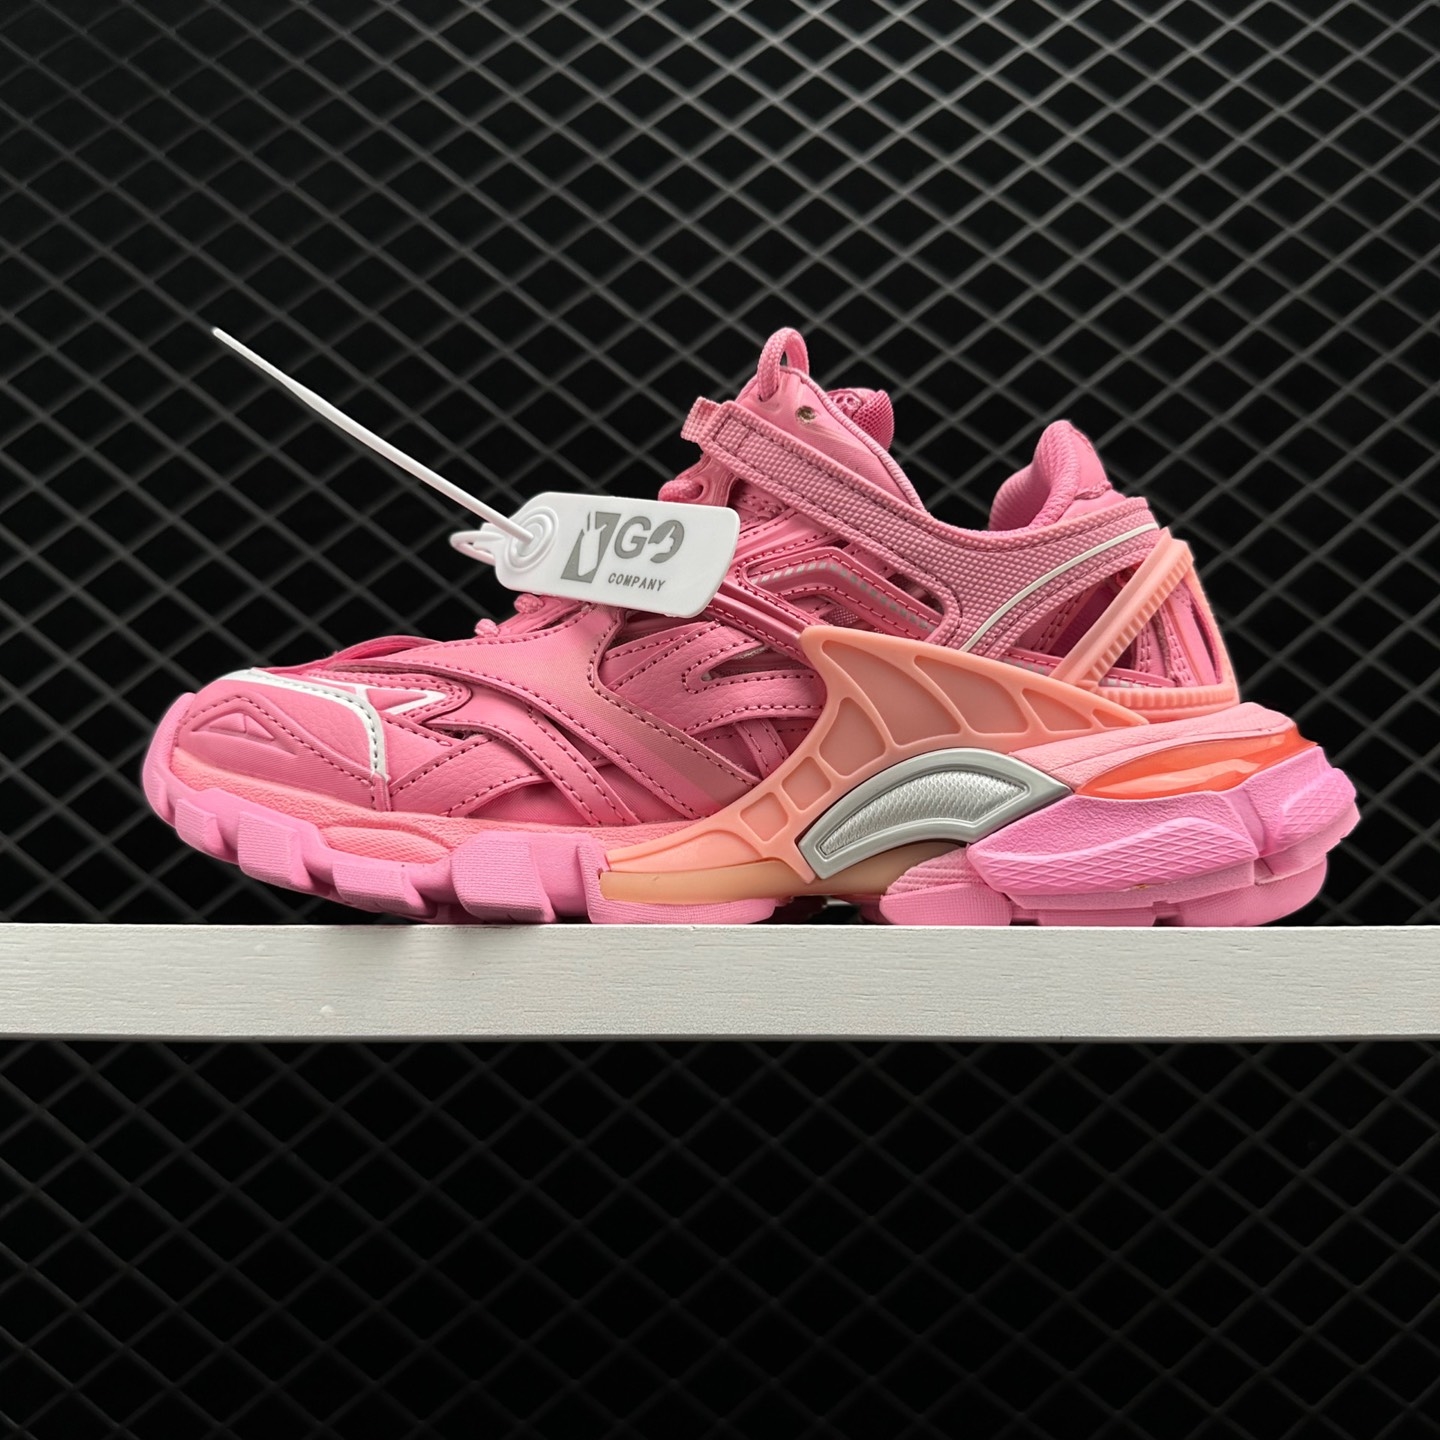 Limited Edition Balenciaga Track Sneakers Pink - Stylish & Comfortable Footwear